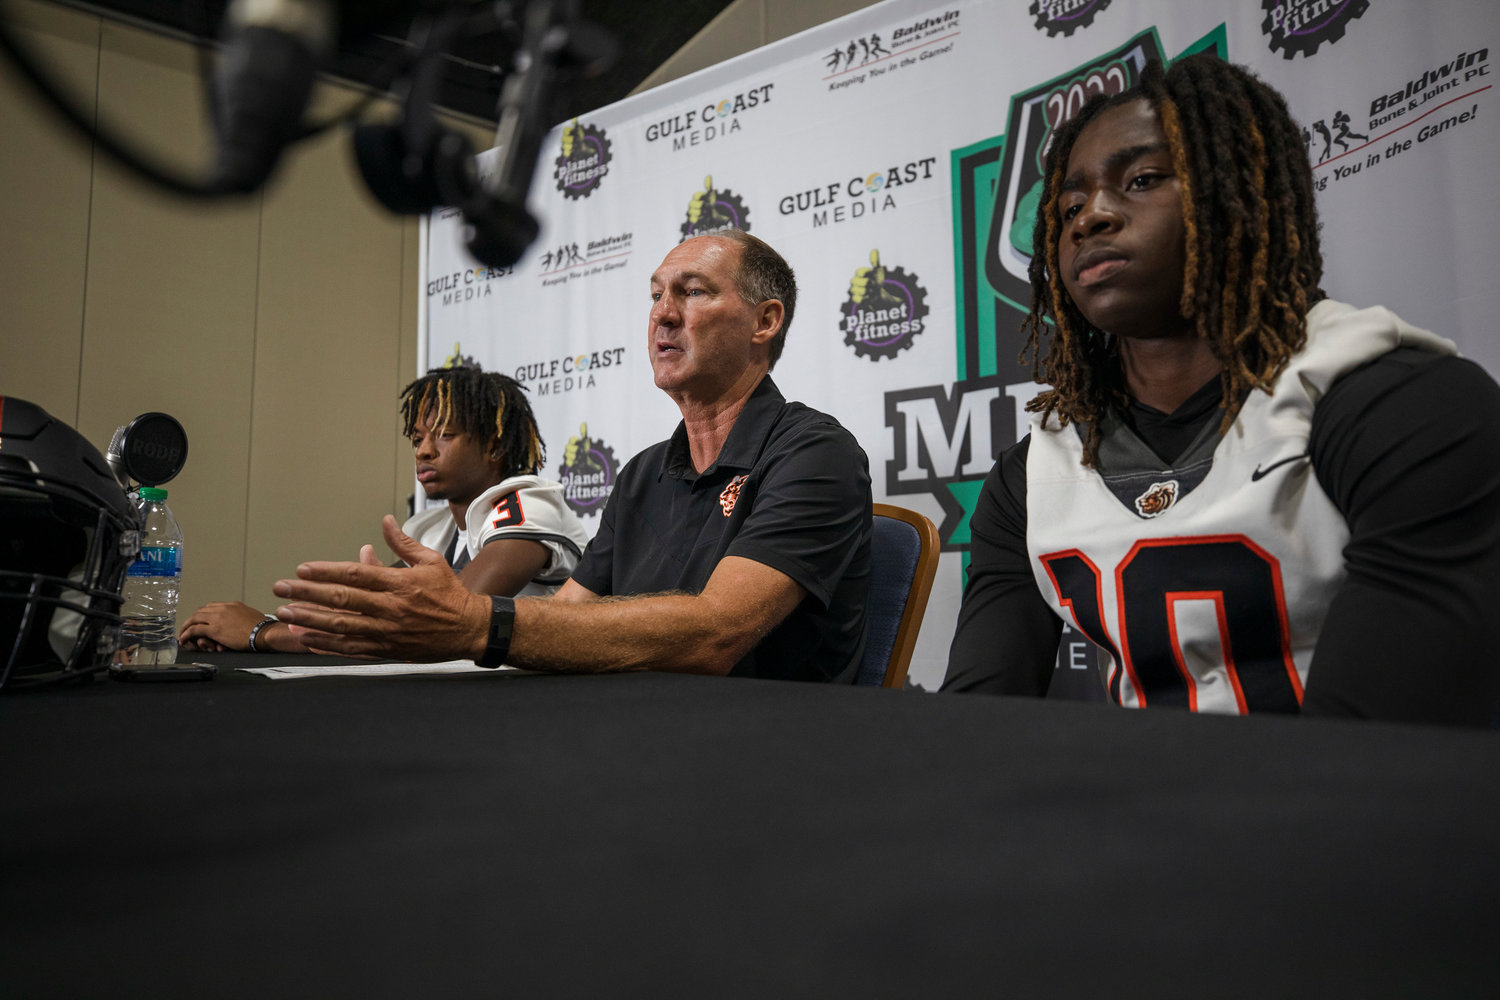 Baldwin County head coach Scott Rials was joined by Ky McNulty (3) and DJ Baker (10) at the inaugural Gulf Coast Media Day at the Orange Beach Event Center Aug. 16, 2022. The second annual event will once again preview the upcoming season featuring the local coaches and players.